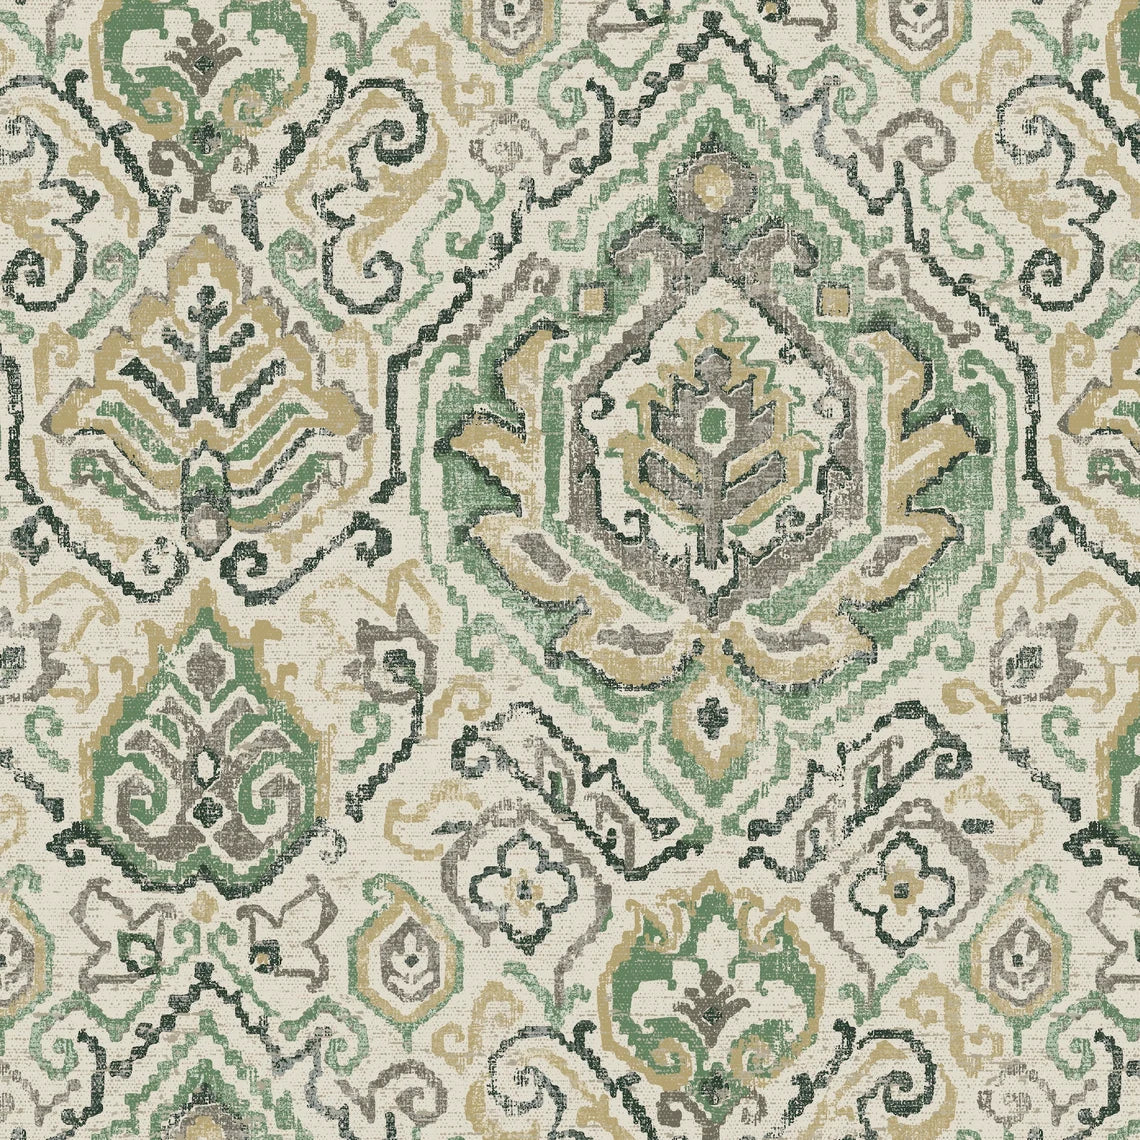 Decorative Pillows in Cathell Meadow Green Medallion Weathered Persian Rug Design- Large Scale